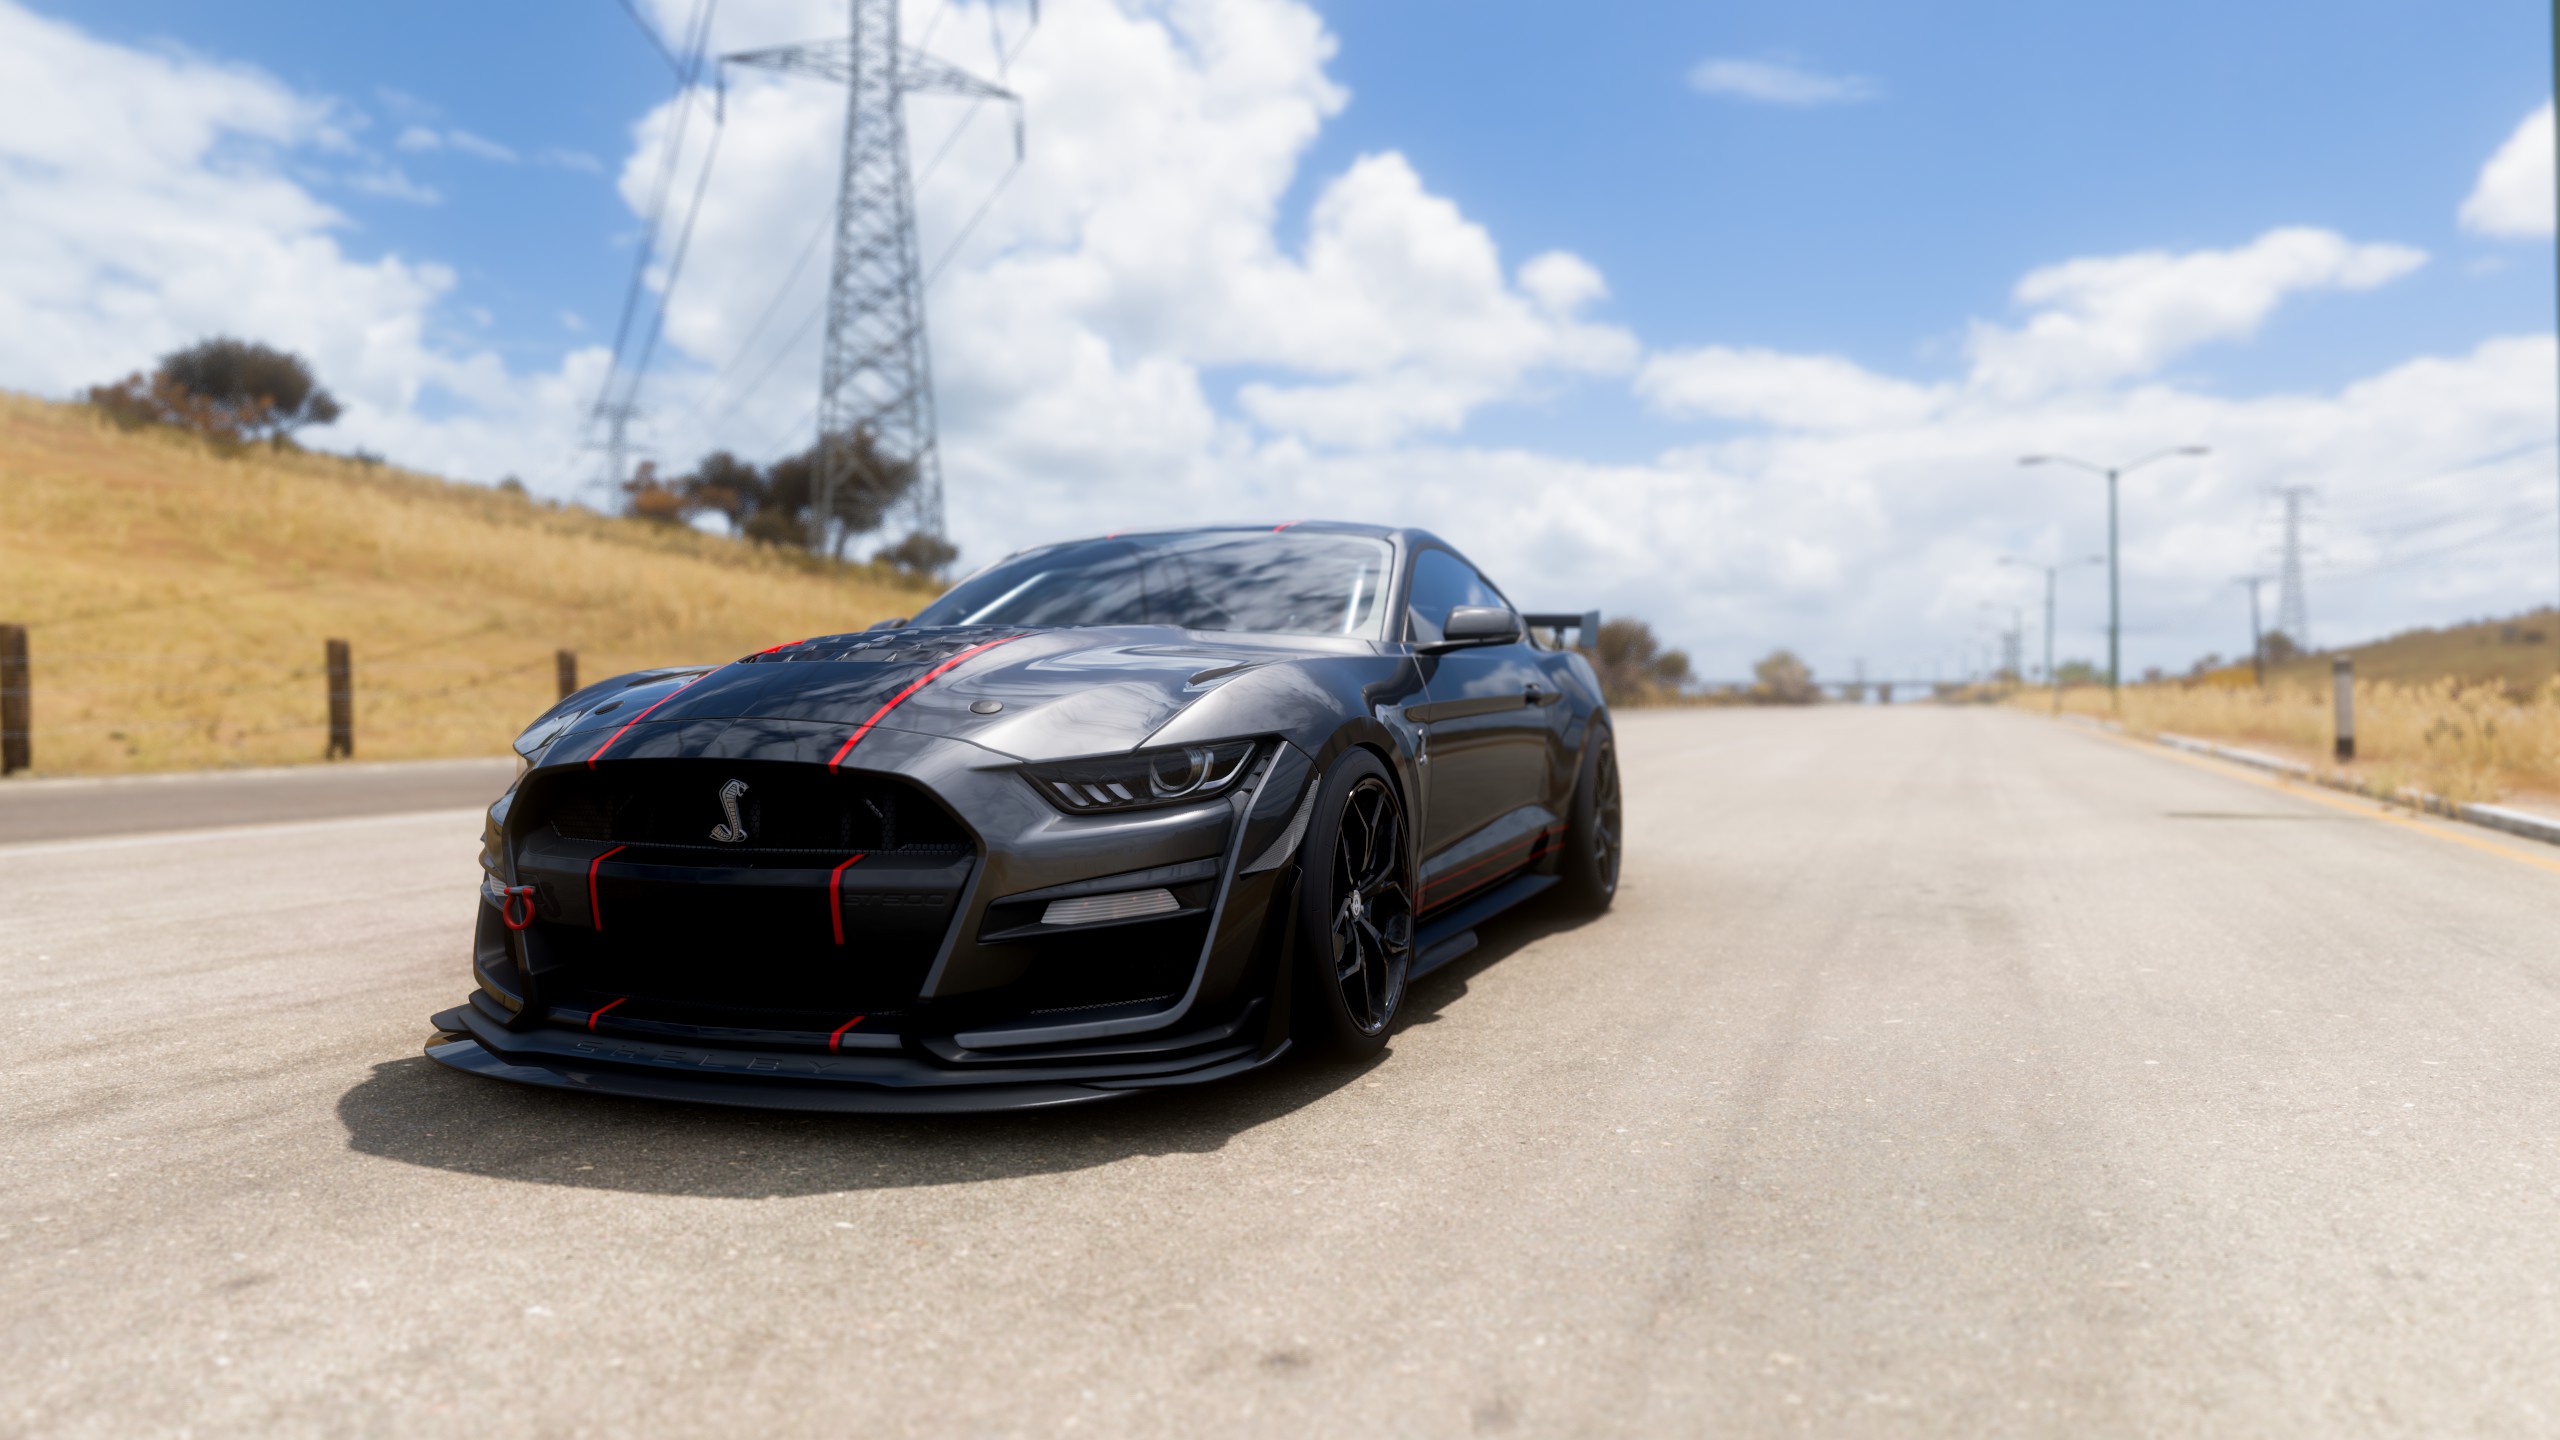 General 2560x1440 Forza Horizon 5 Ford Mustang Shelby car digital art video games outdoors asphalt road power lines muscle cars American cars Xbox Game Studios sky clouds PlaygroundGames Turn 10 Studios sunlight video game art screen shot frontal view Ford Mustang CGI